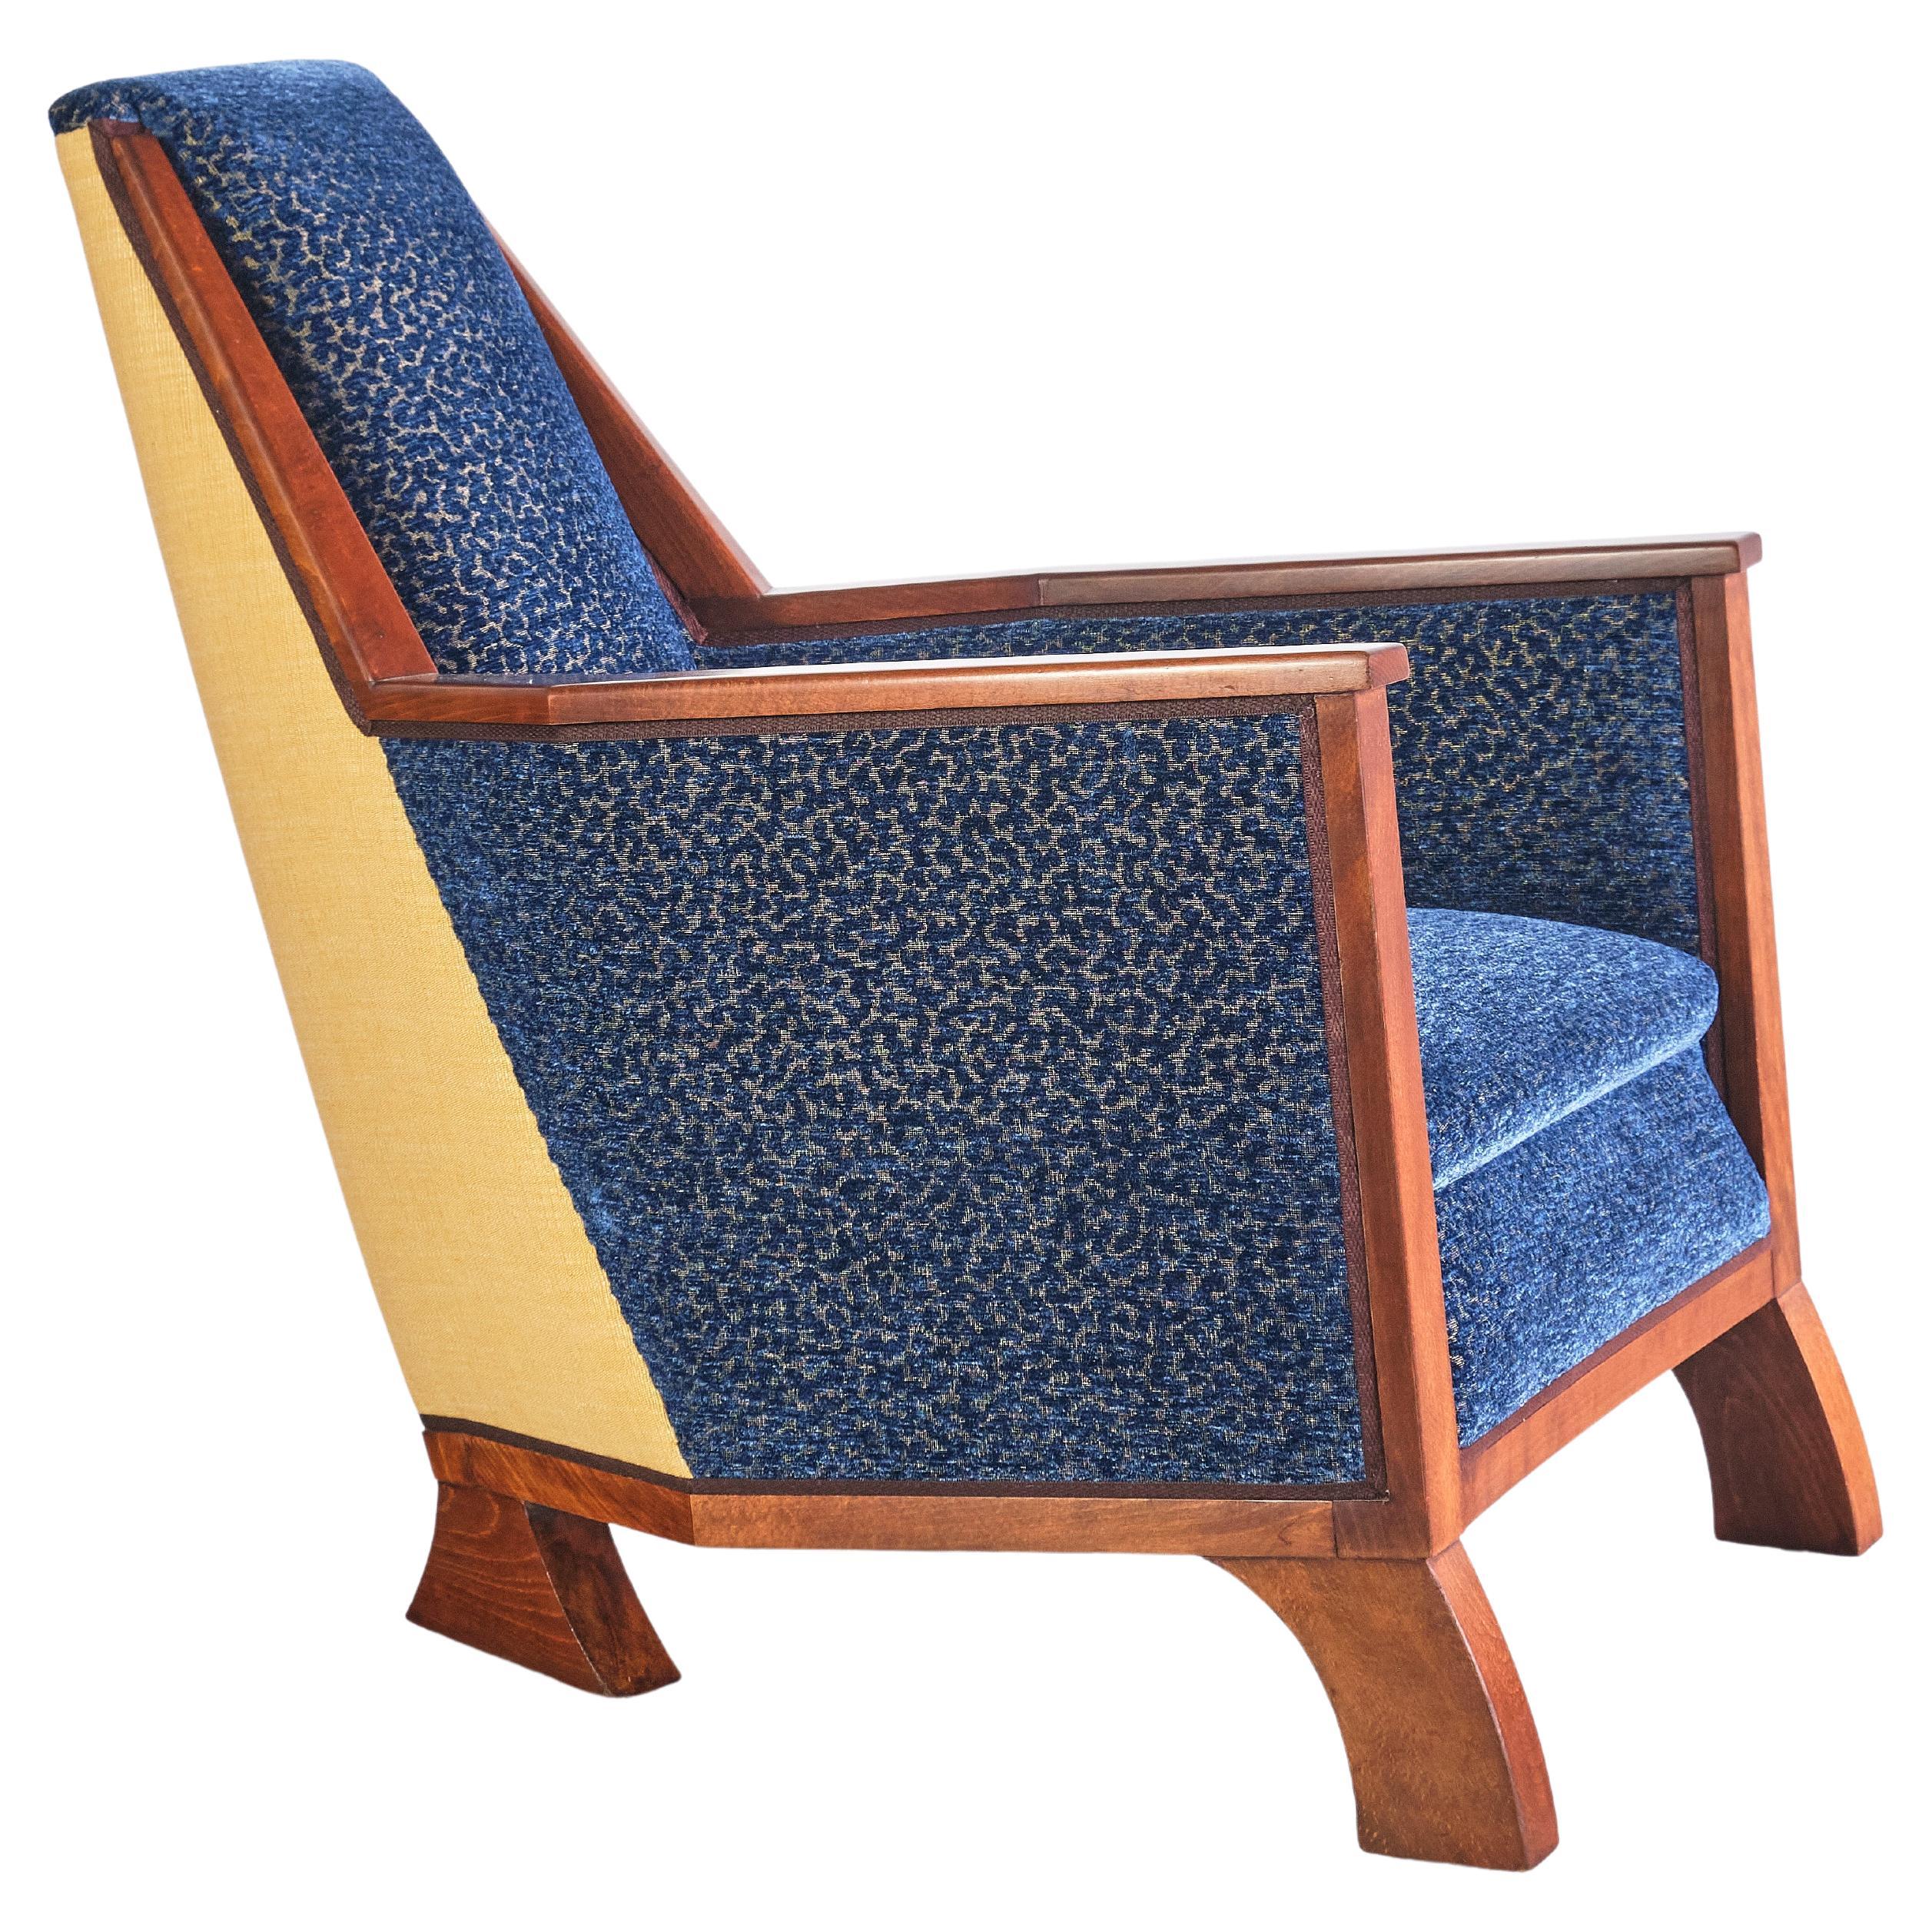 Exceptional Art Deco Arm Chair in Blue Velvet and Maple, Northern France, 1920s For Sale